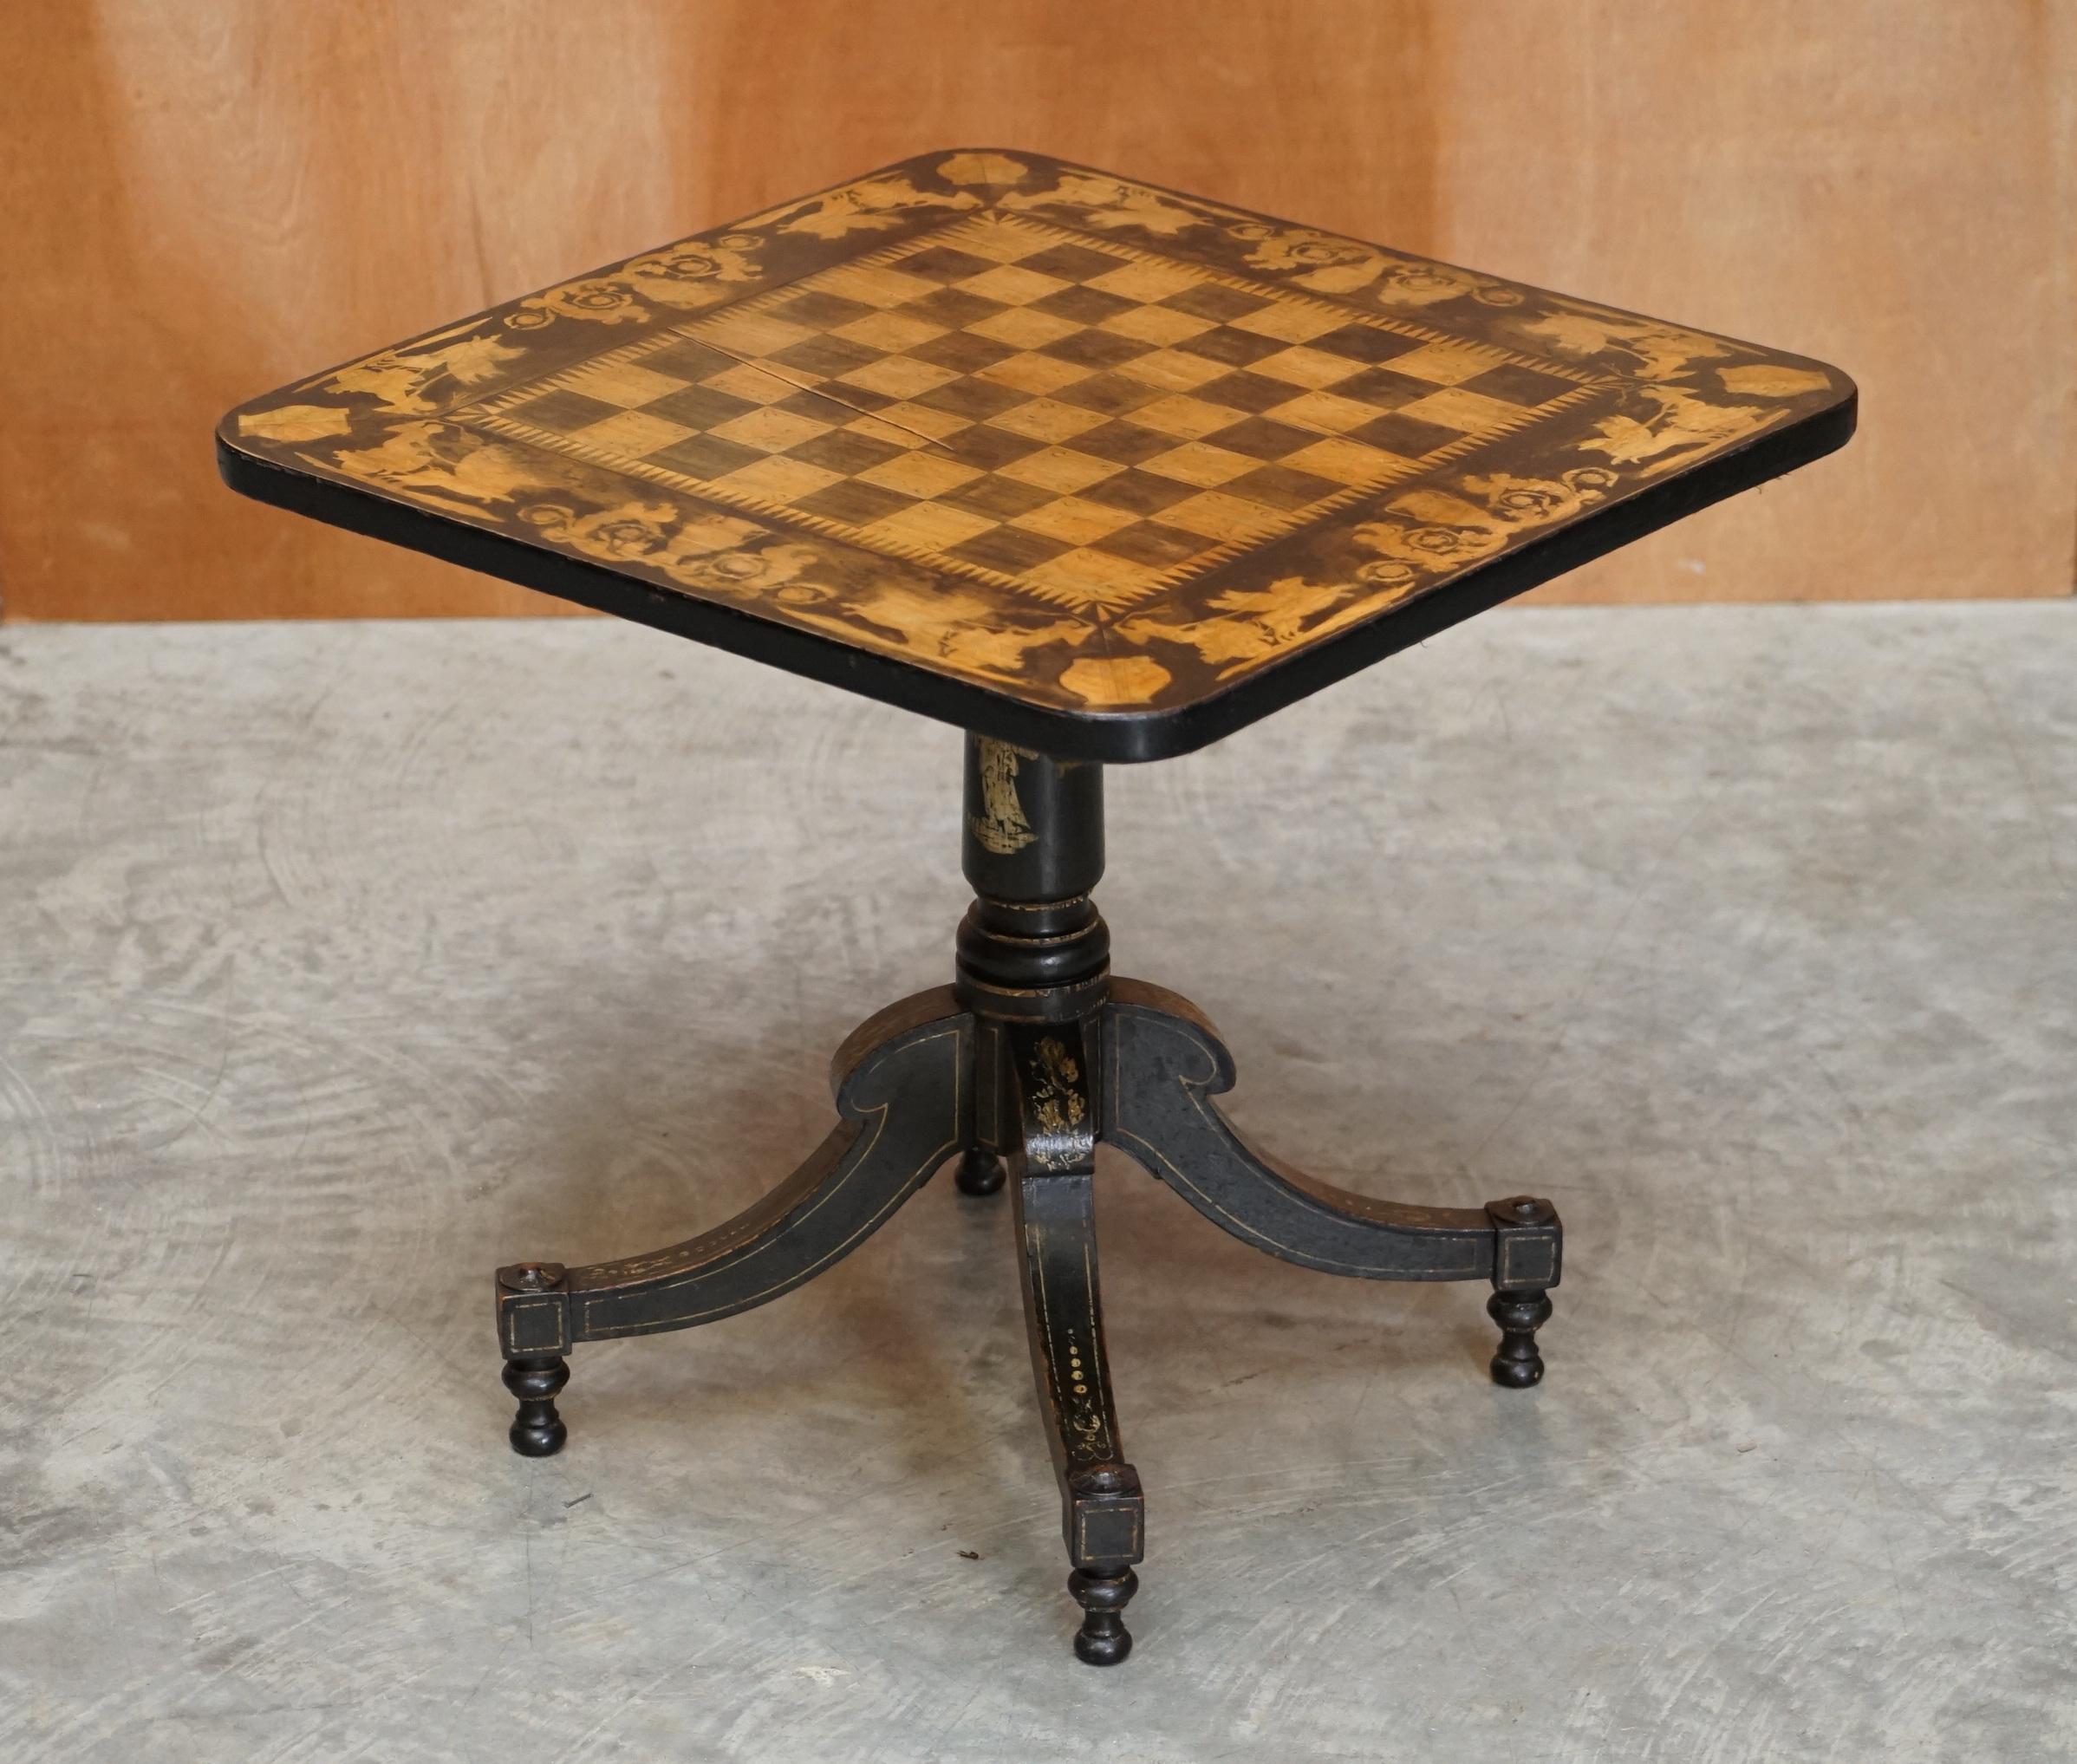 We are delighted to offer this lovely side table sized Victorian 1860 gold leaf ebonised Chess games table.

A very good looking well-made and function piece of furniture, extremely decorative, the top has gorgeous painting on it, which follows to